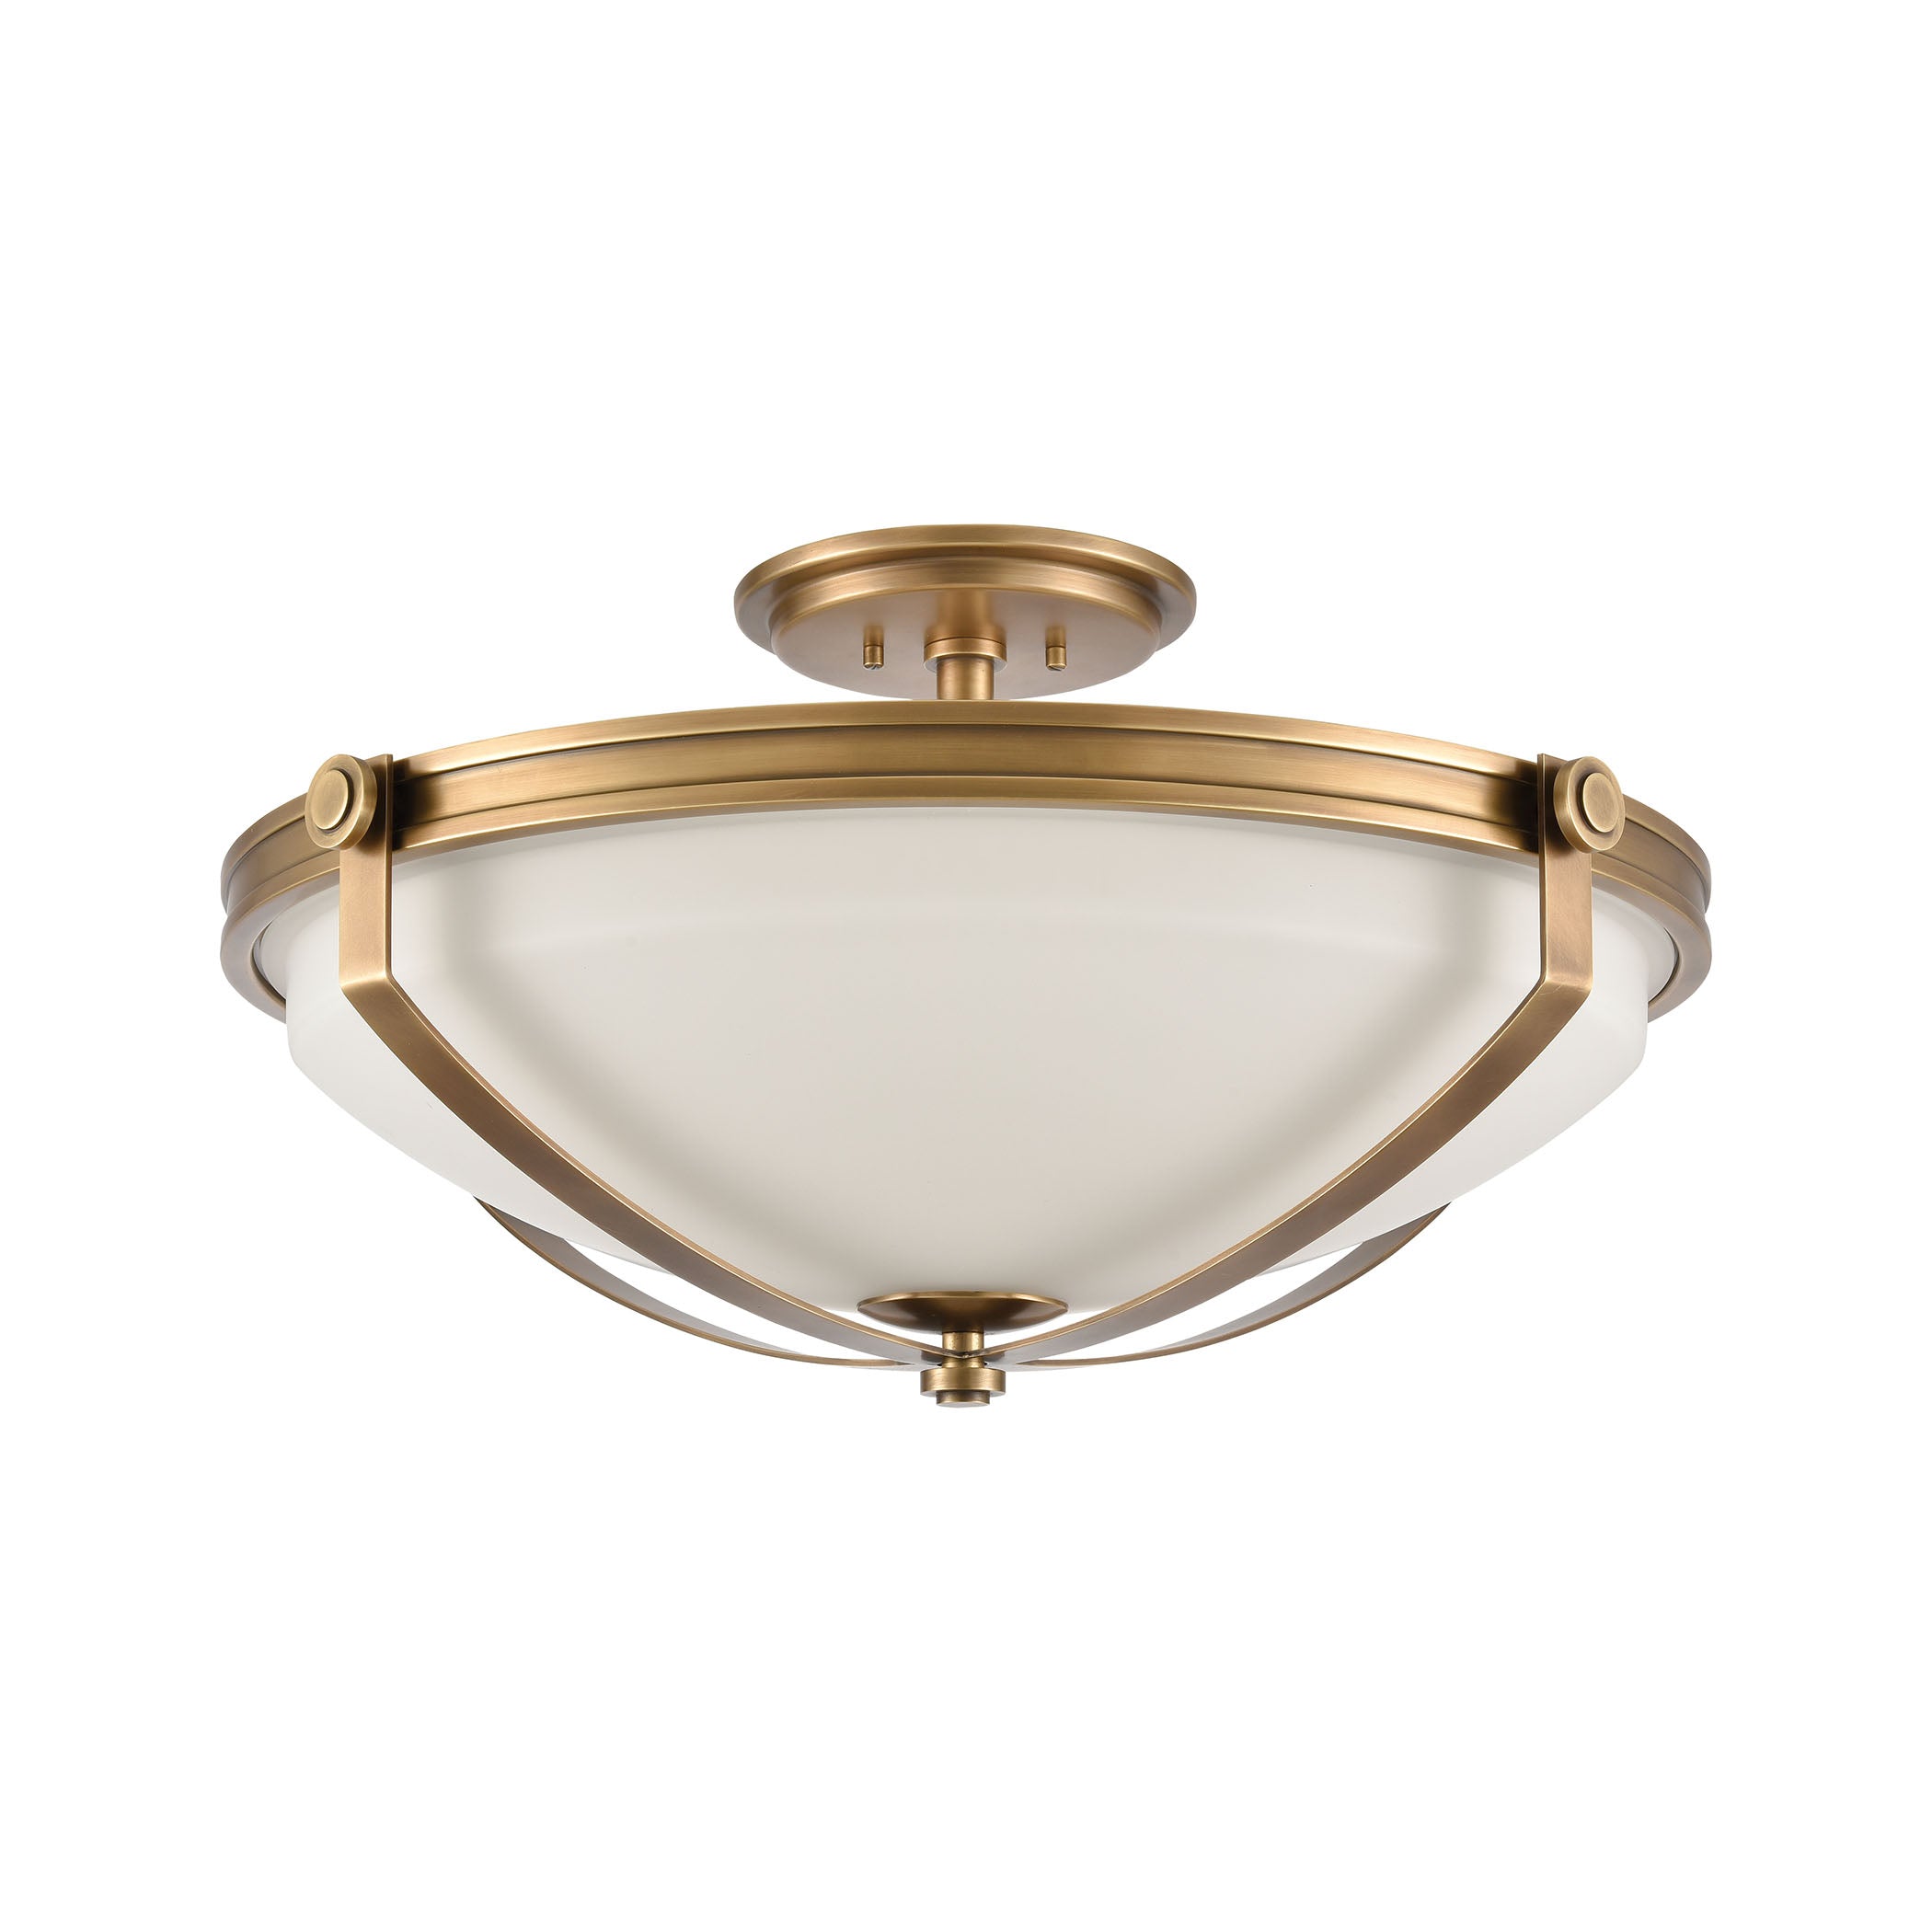 ELK Lighting 89116/4 Connelly 4-Light Semi Flush in Natural Brass with Frosted Glass